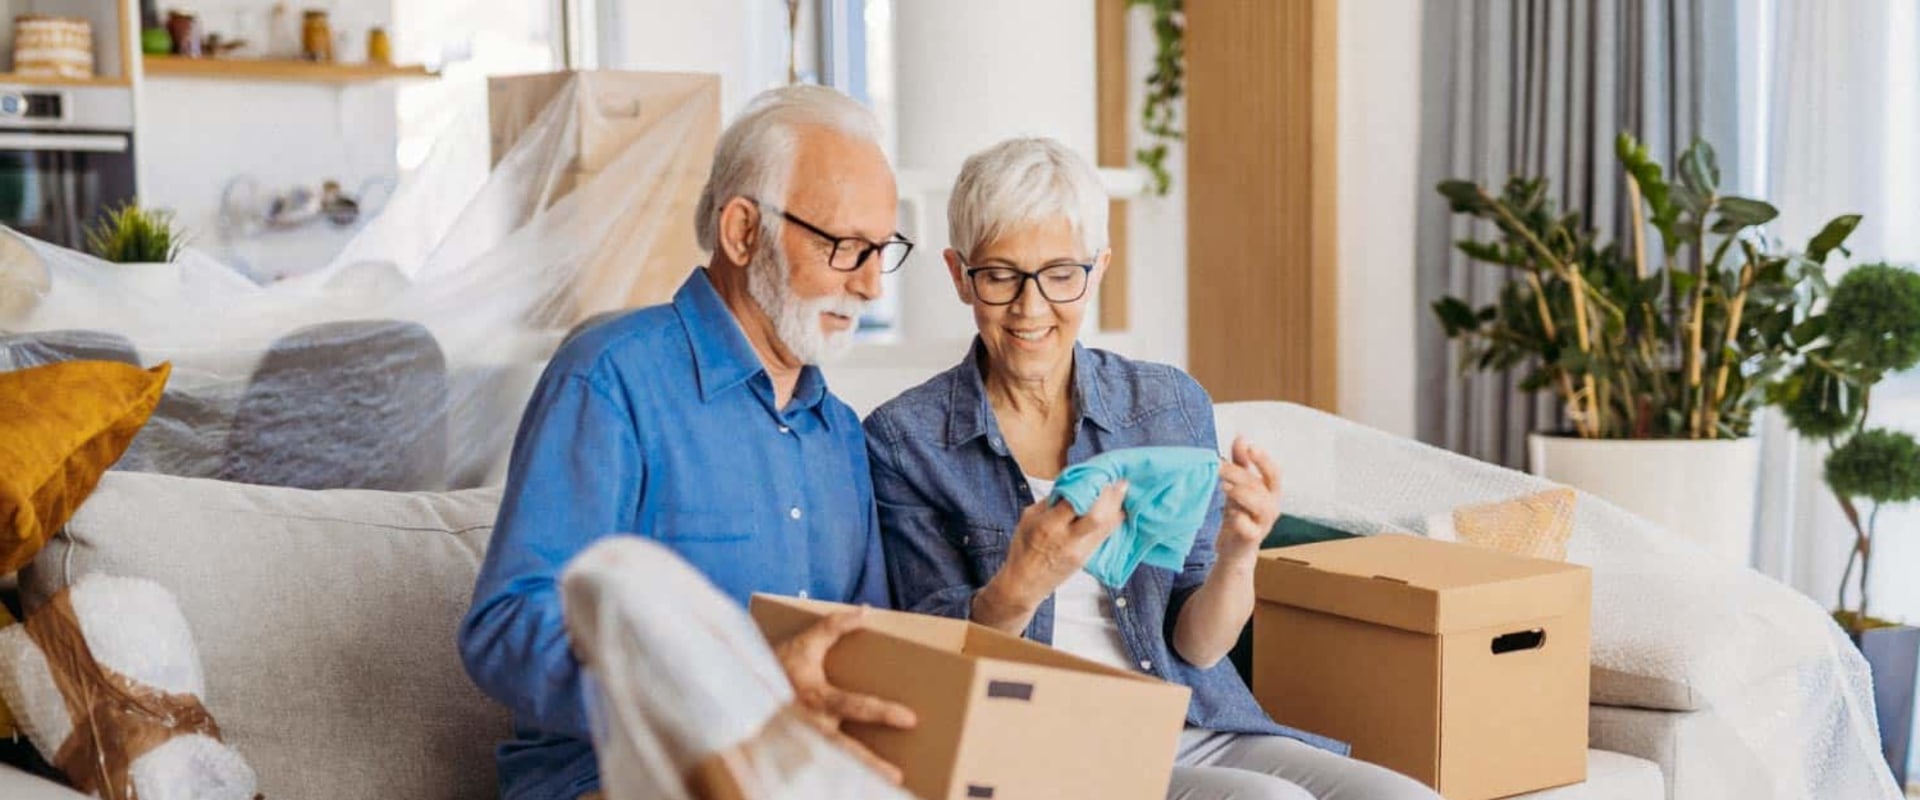 Decluttering and Downsizing Tips: A Guide for Assisted Living Placement Advice and Relocation Assistance